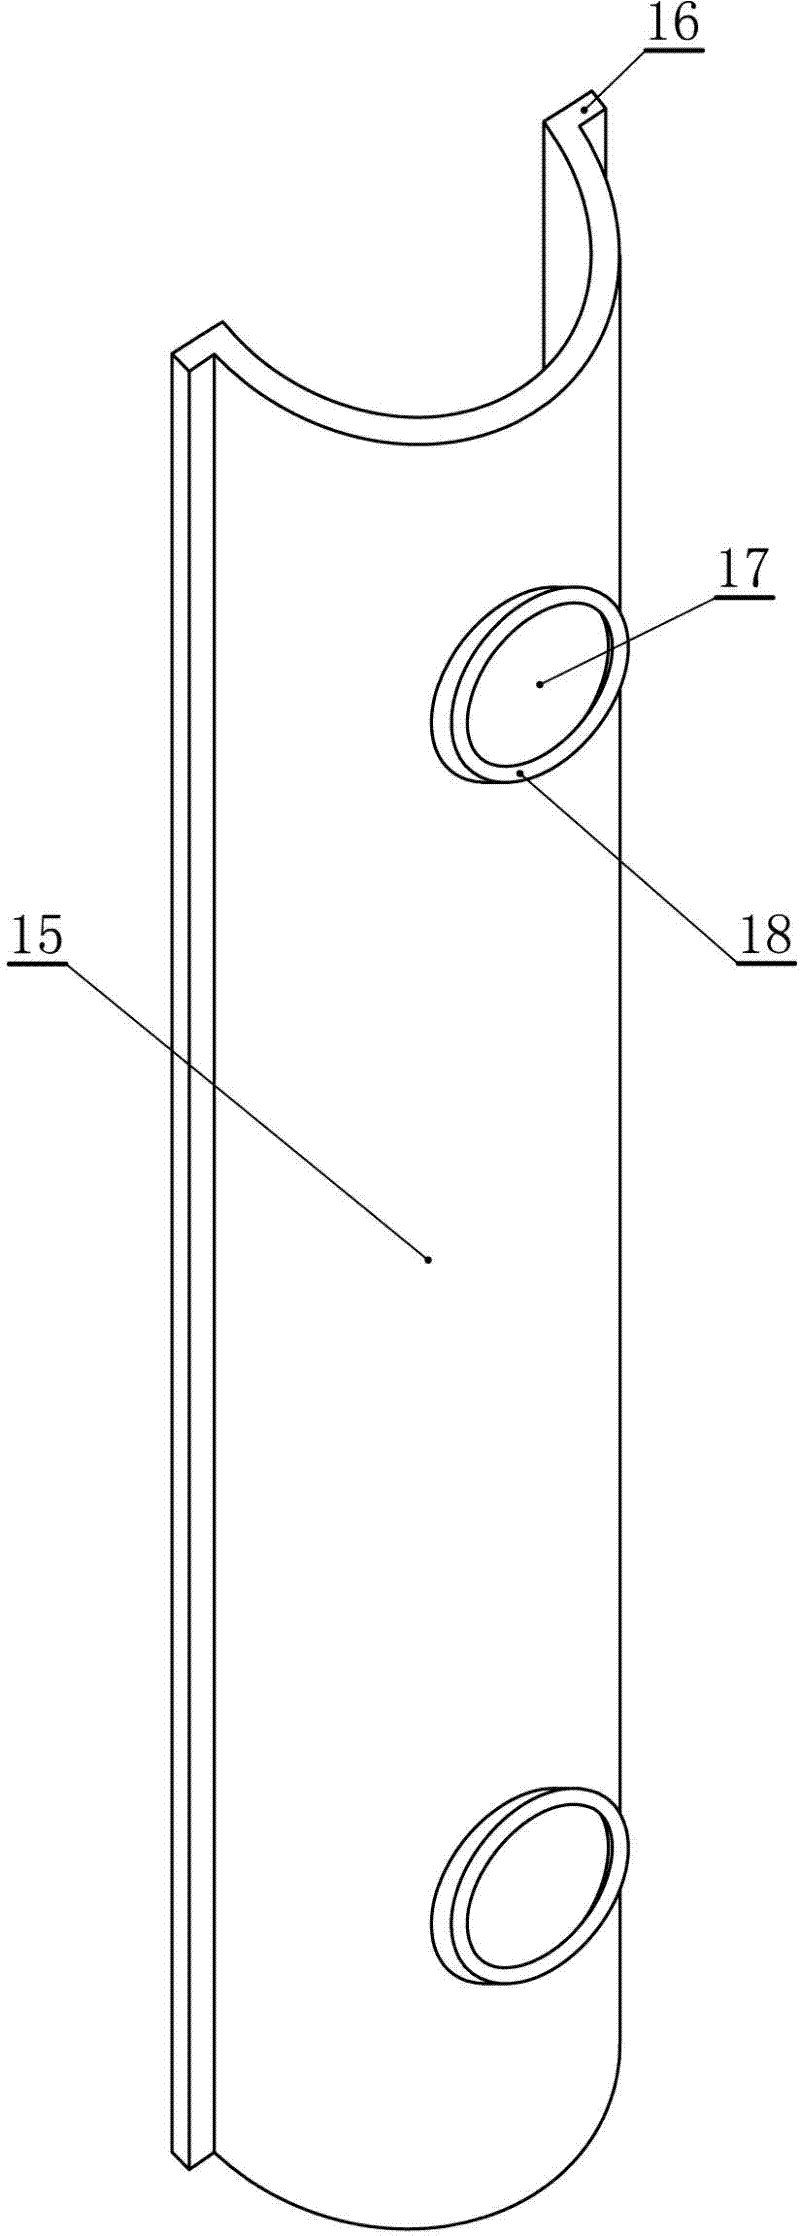 Circular pipe communicated, spliced, edge-pinched, and welded pressure-bearing heat exchanger, and manufacturing process thereof